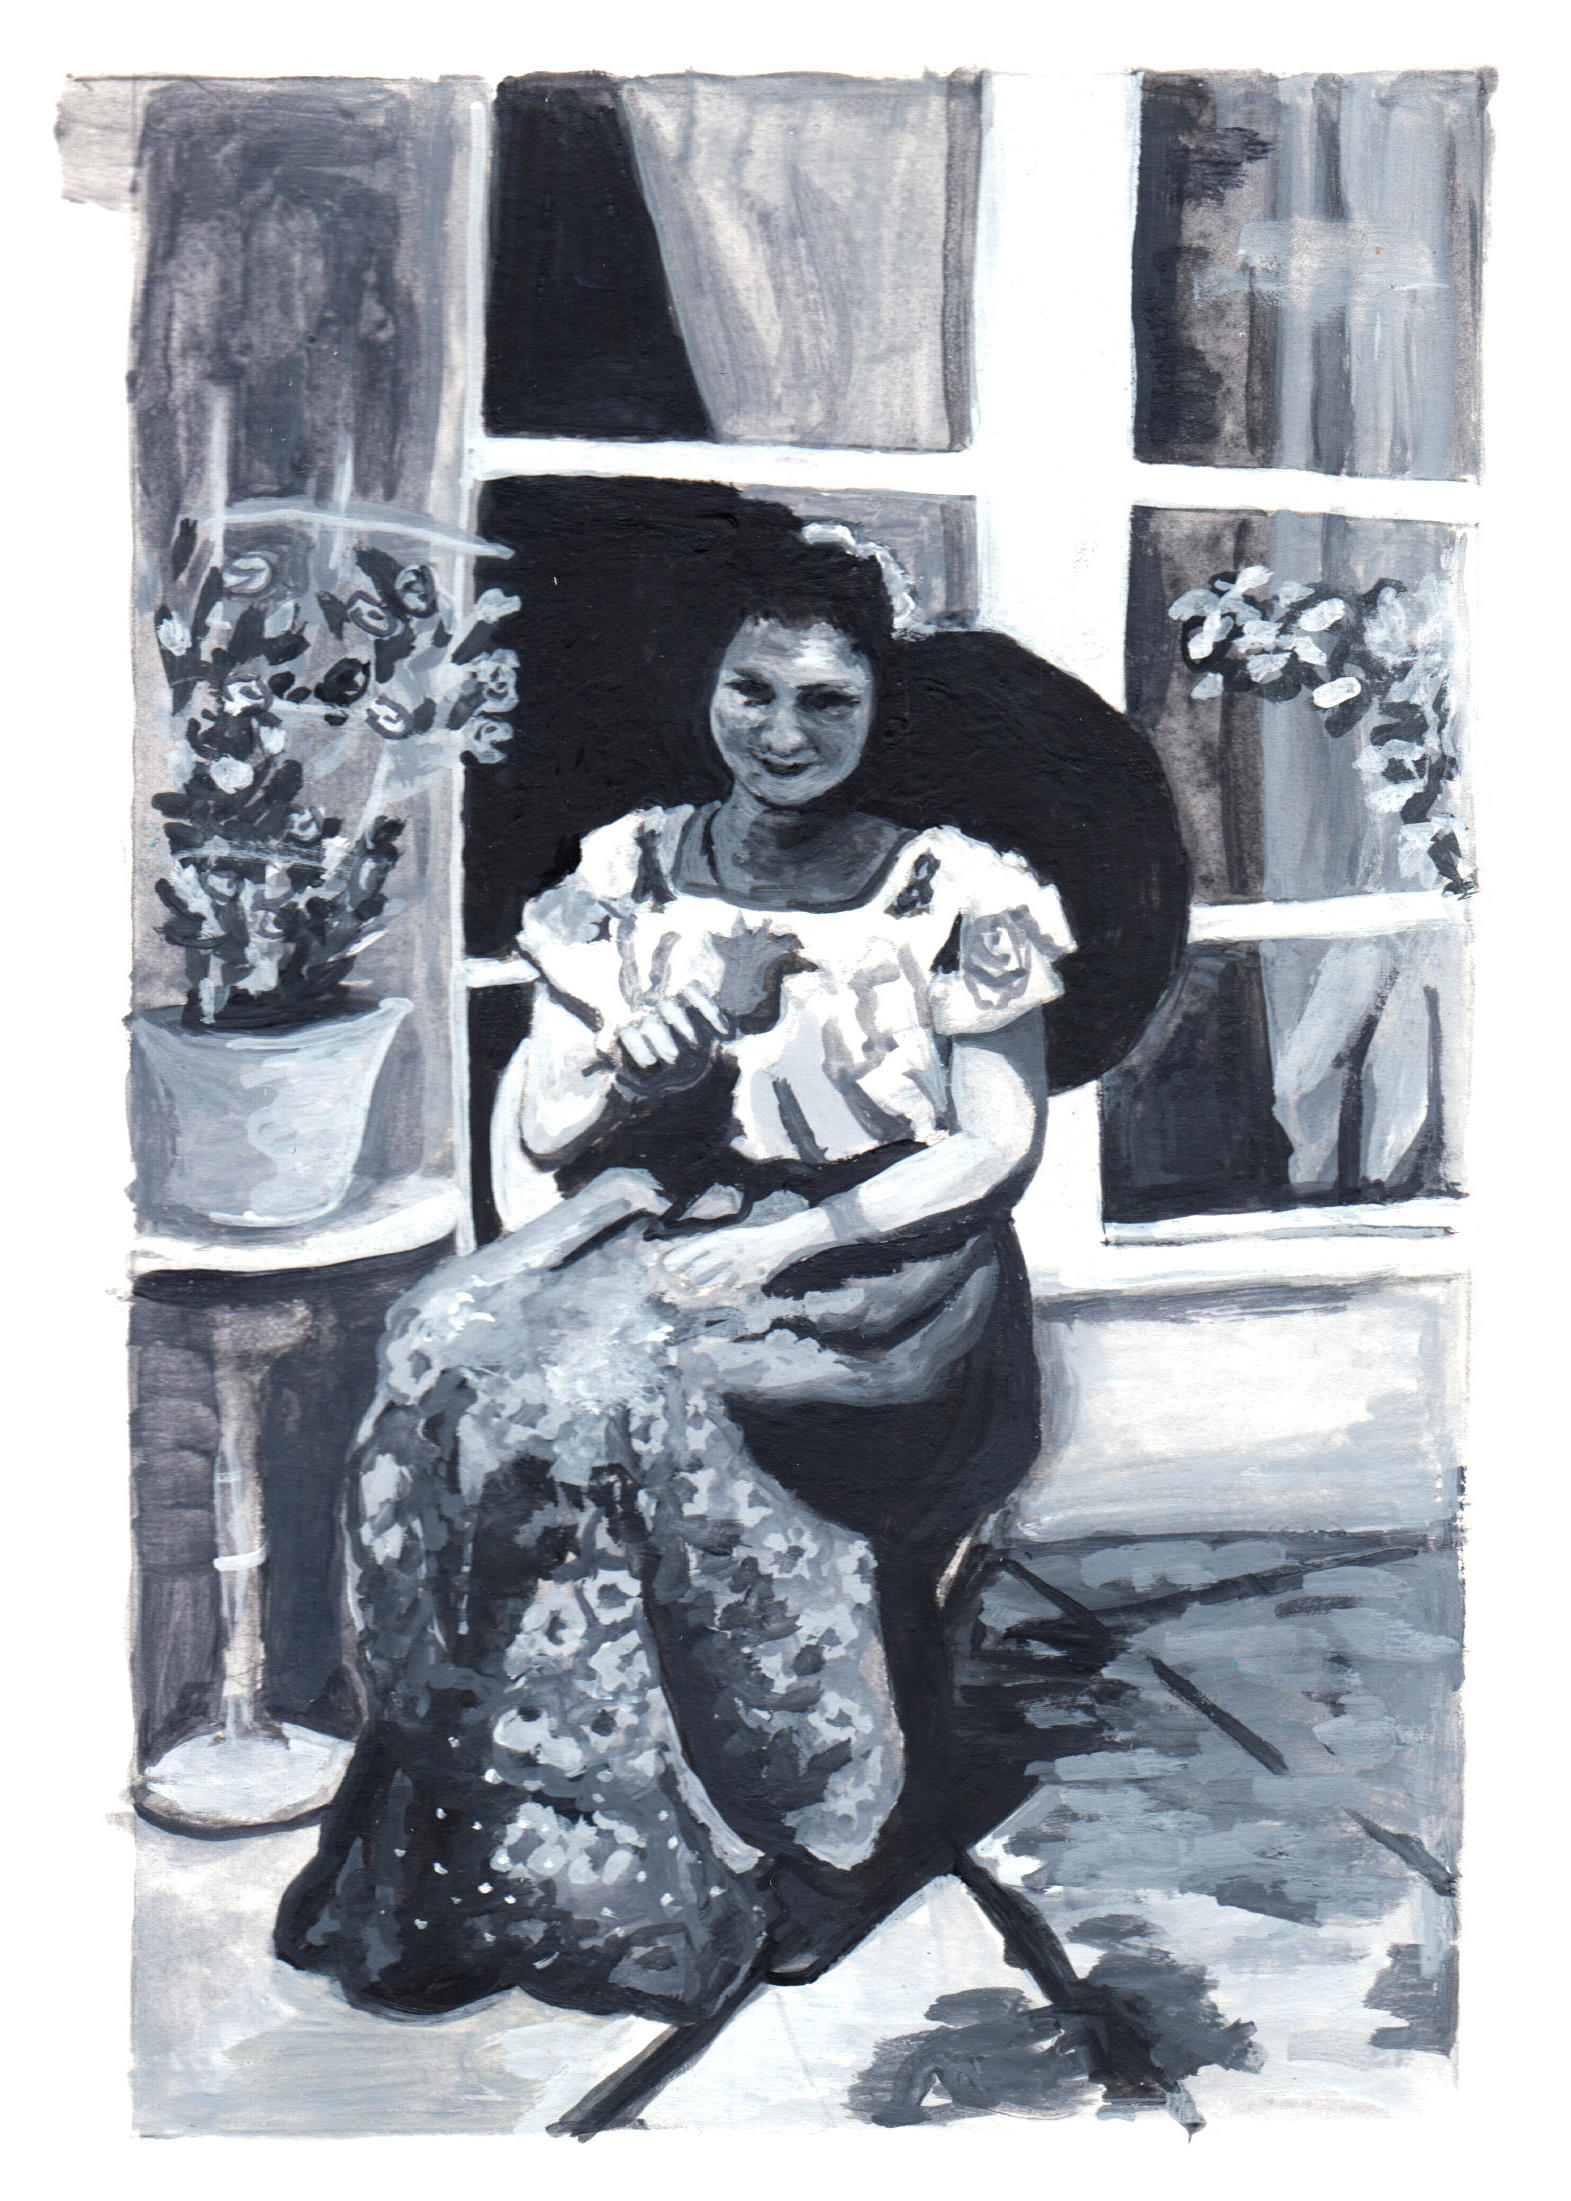 A black and white gouache painting of a woman sitting in a chair wearing a China Poblana outfit. My great grandmother. 